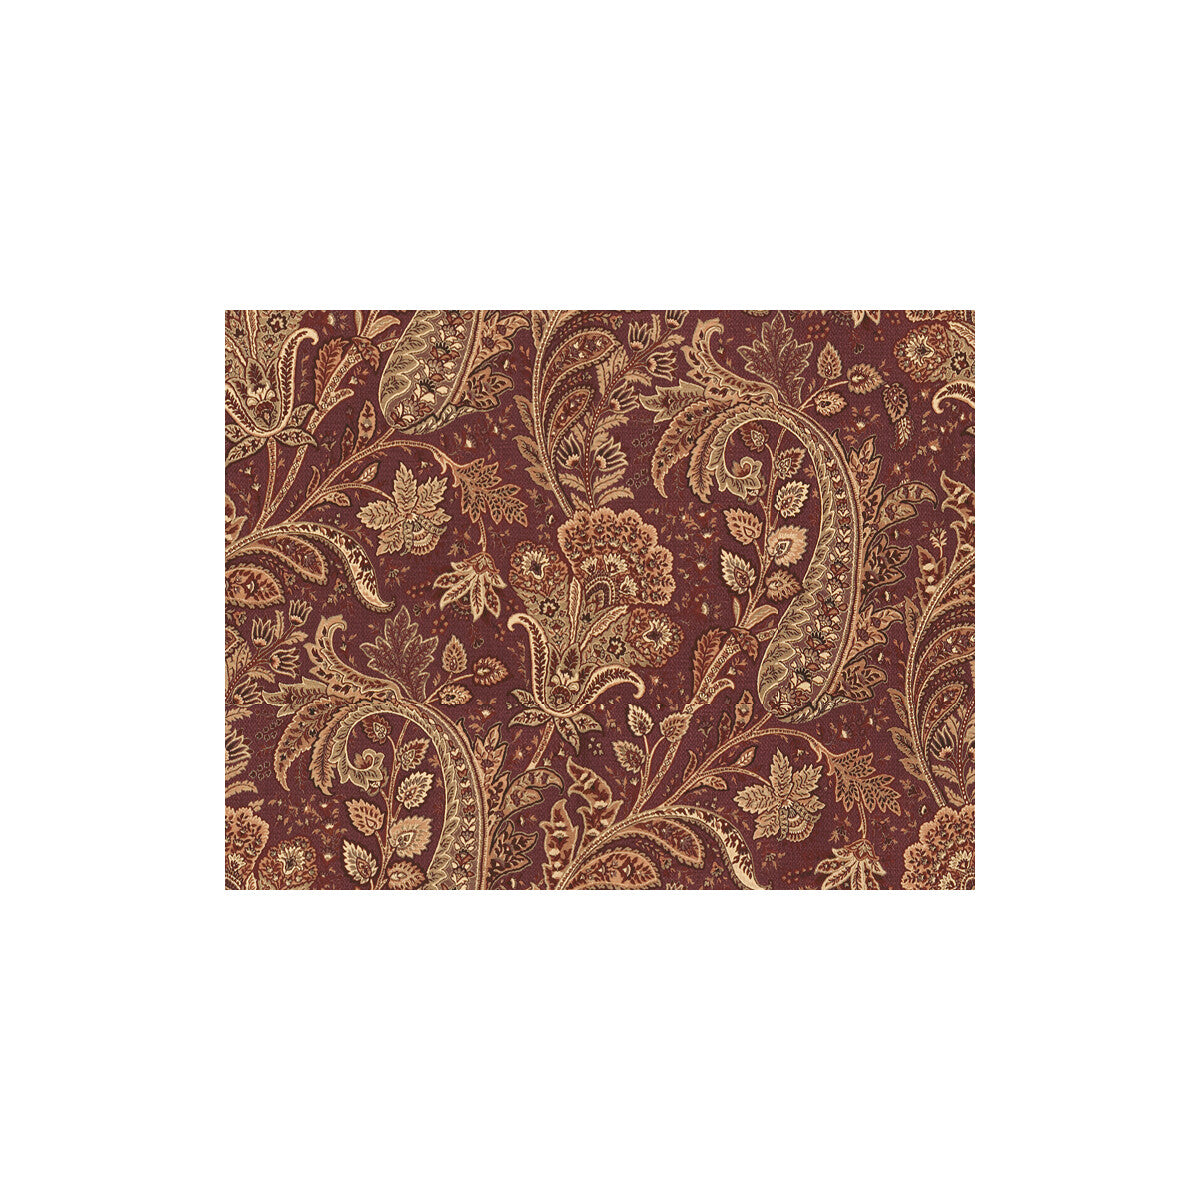 Romance Two fabric in fig color - pattern 30537.10.0 - by Kravet Couture